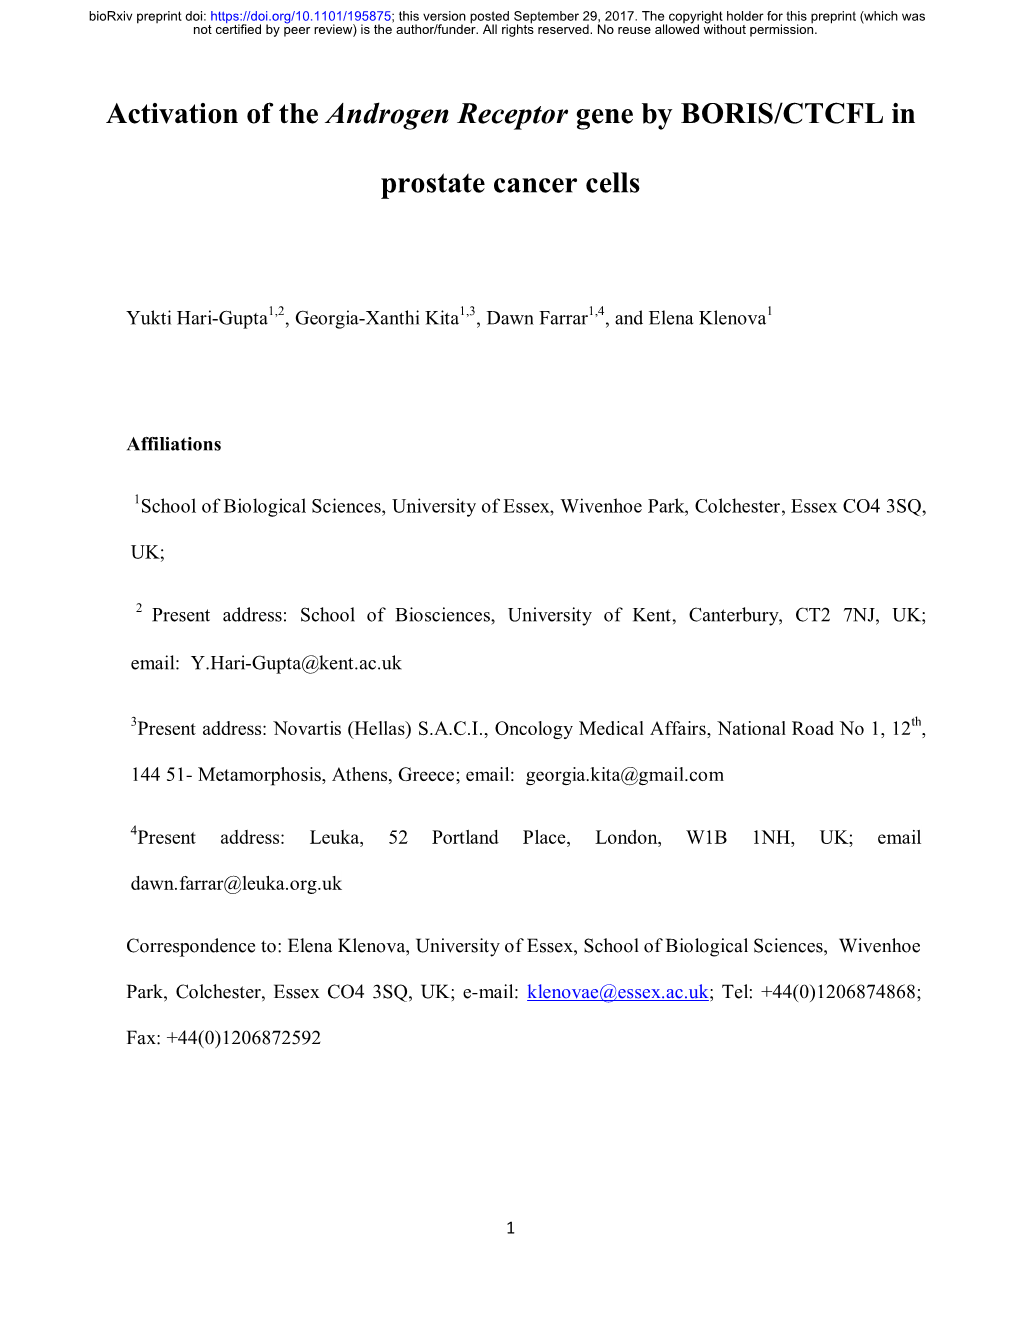 Activation of the Androgen Receptor Gene by BORIS/CTCFL in Prostate